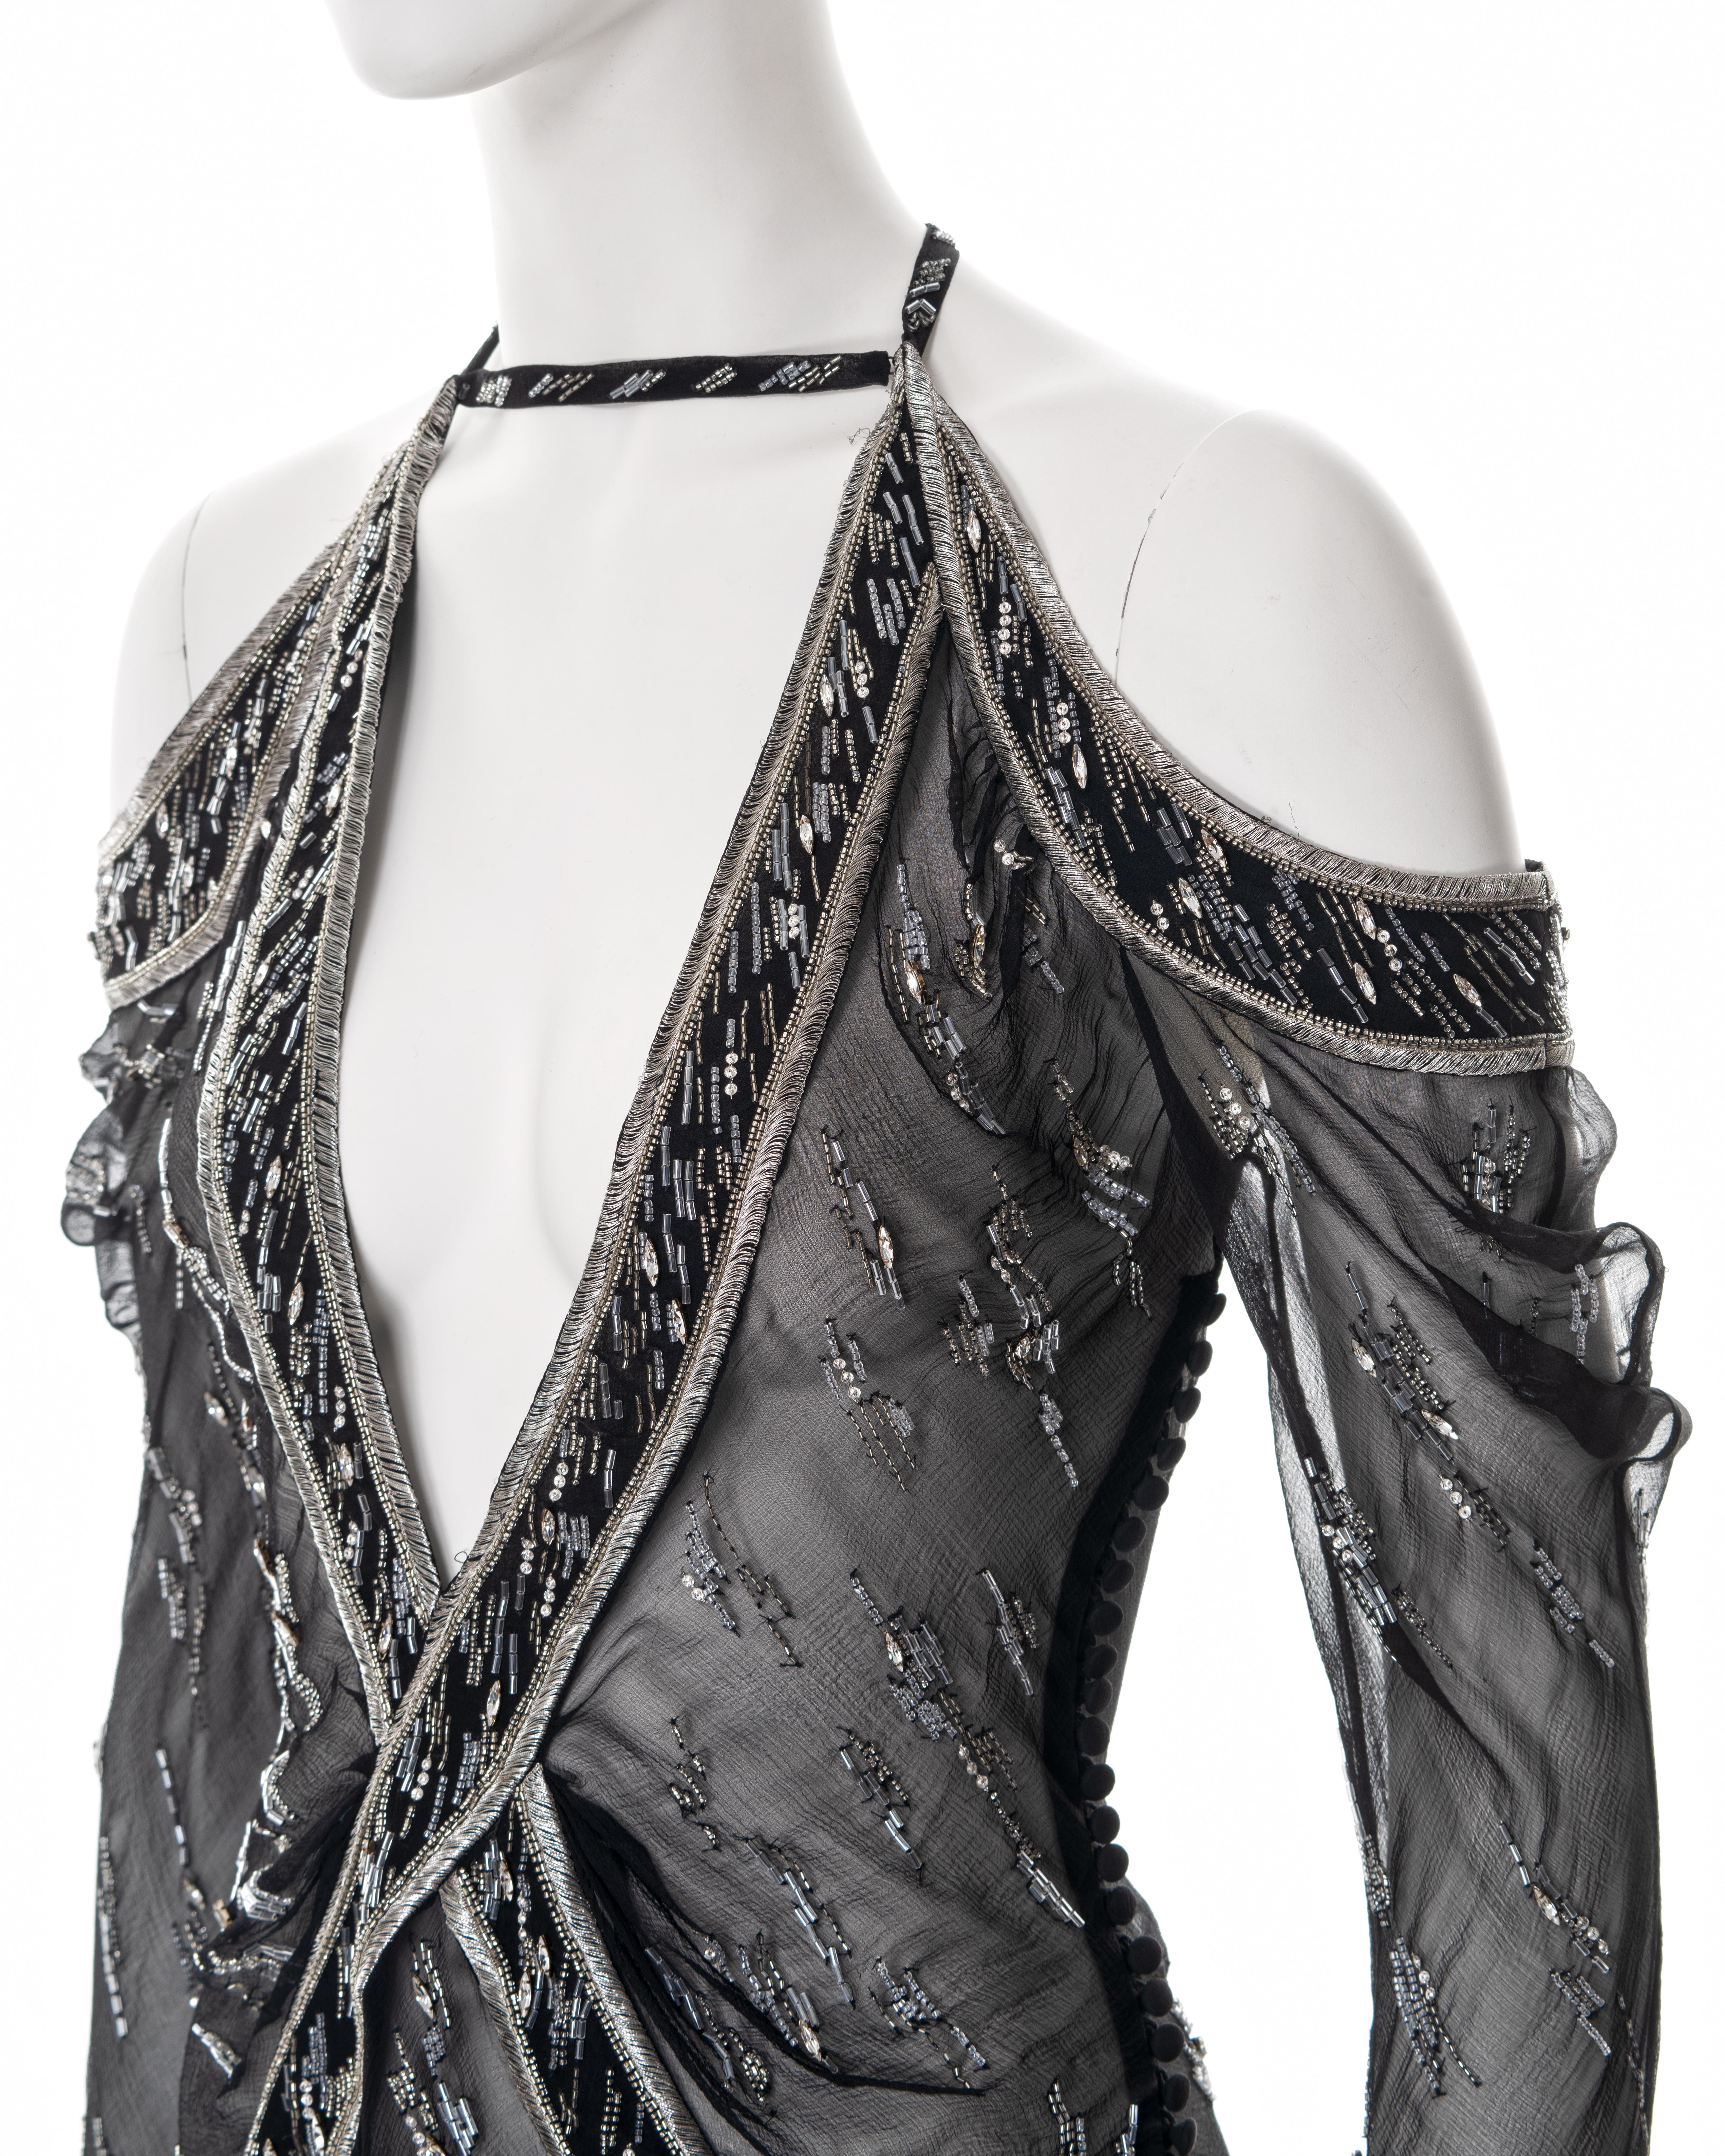 Christian Dior by John Galliano embellished silk evening blouse, ss 2005 4